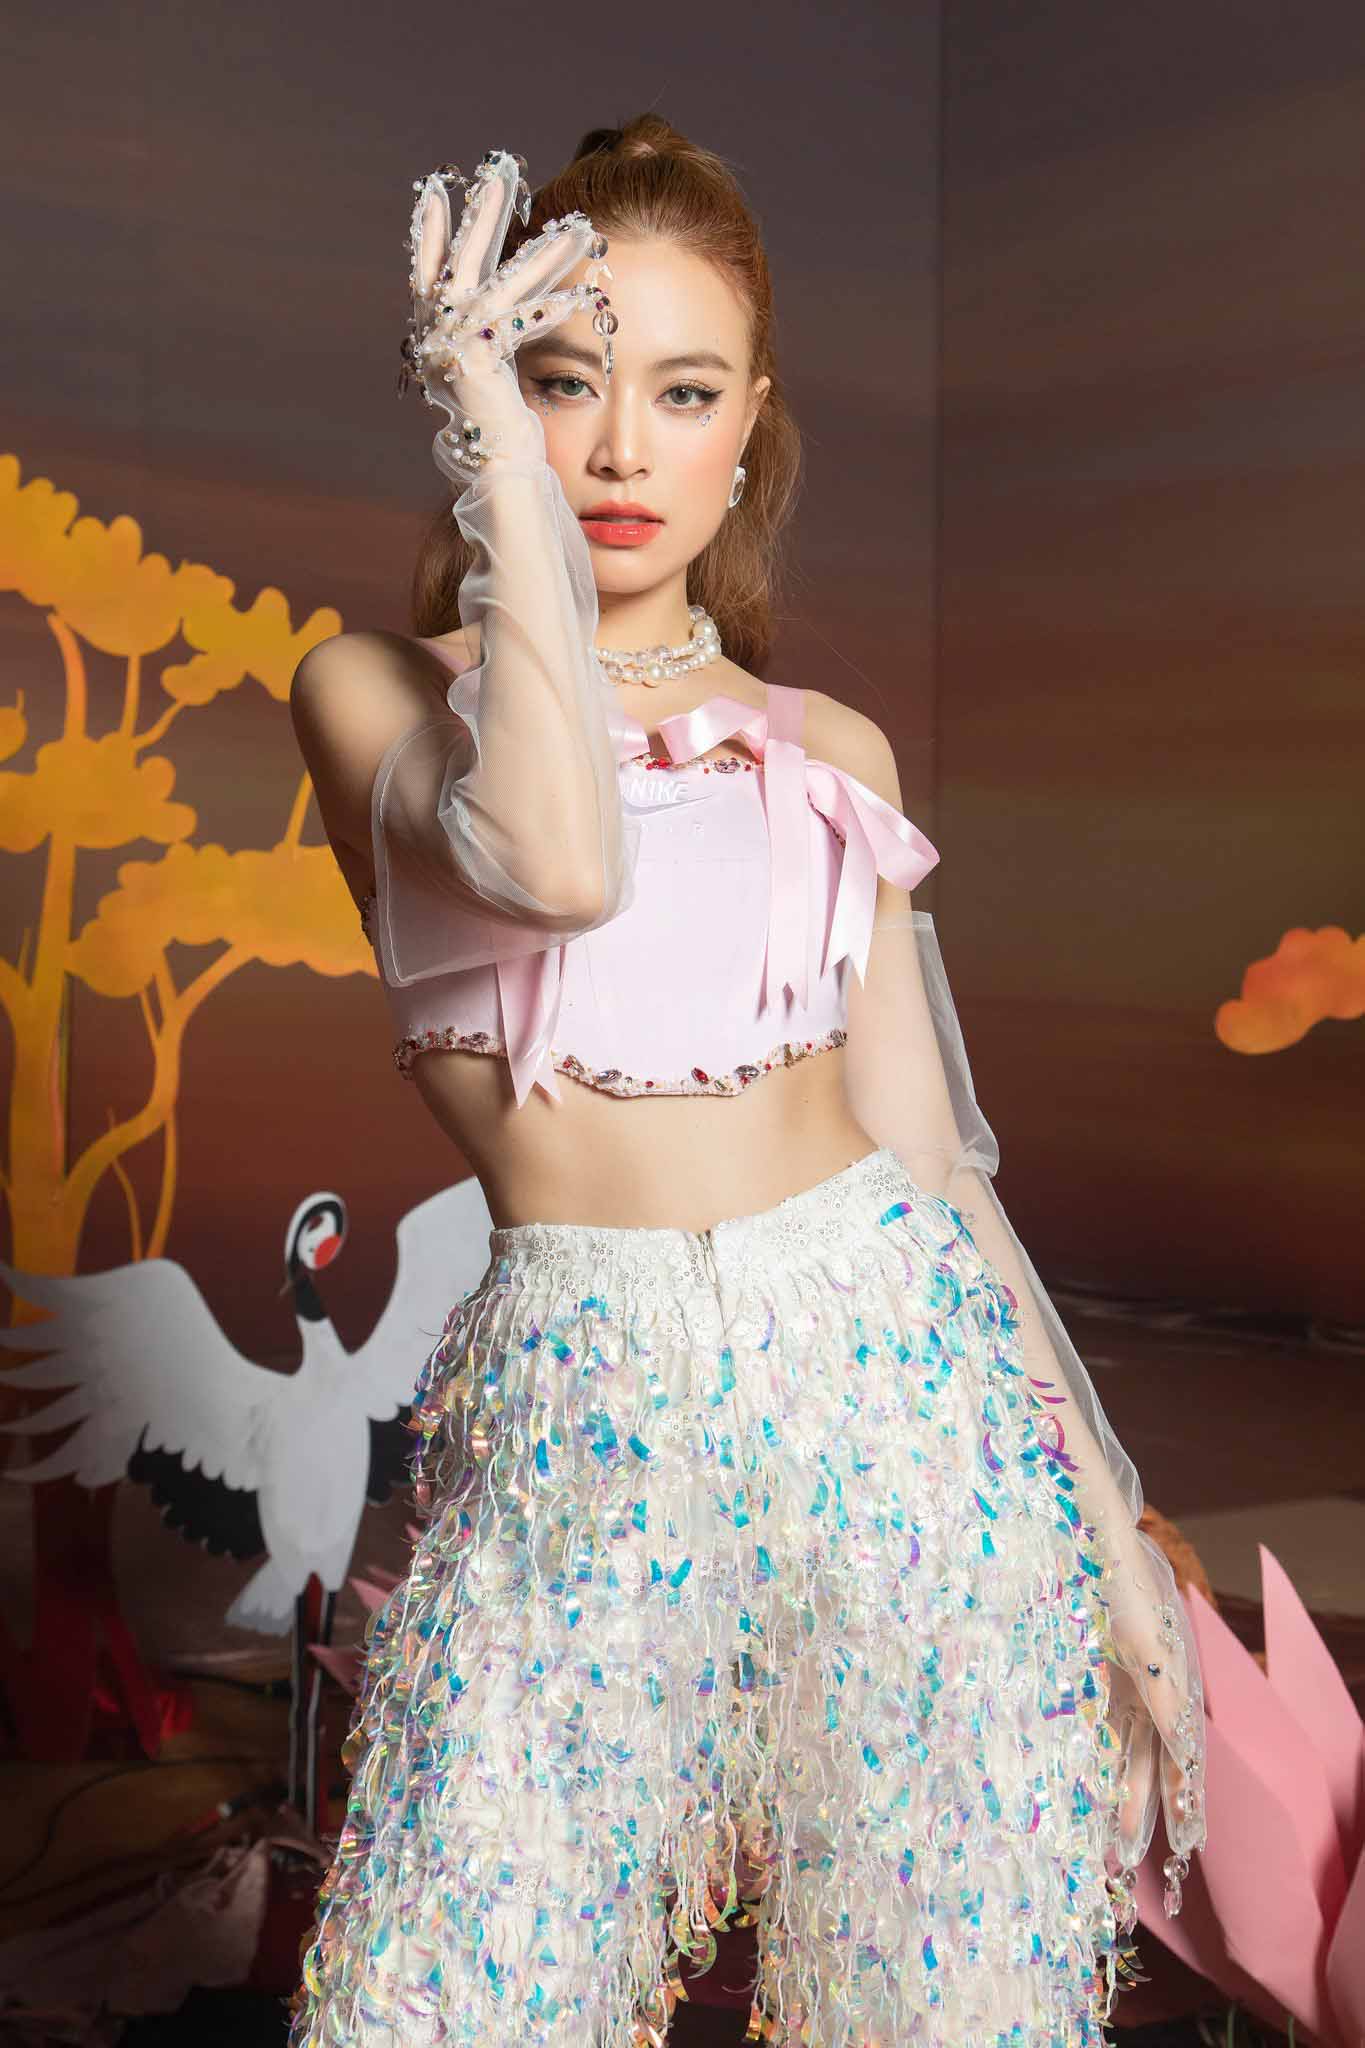 Hoang Thuy Linh wearing short clothes praised for her beauty at the age of 33 - 1